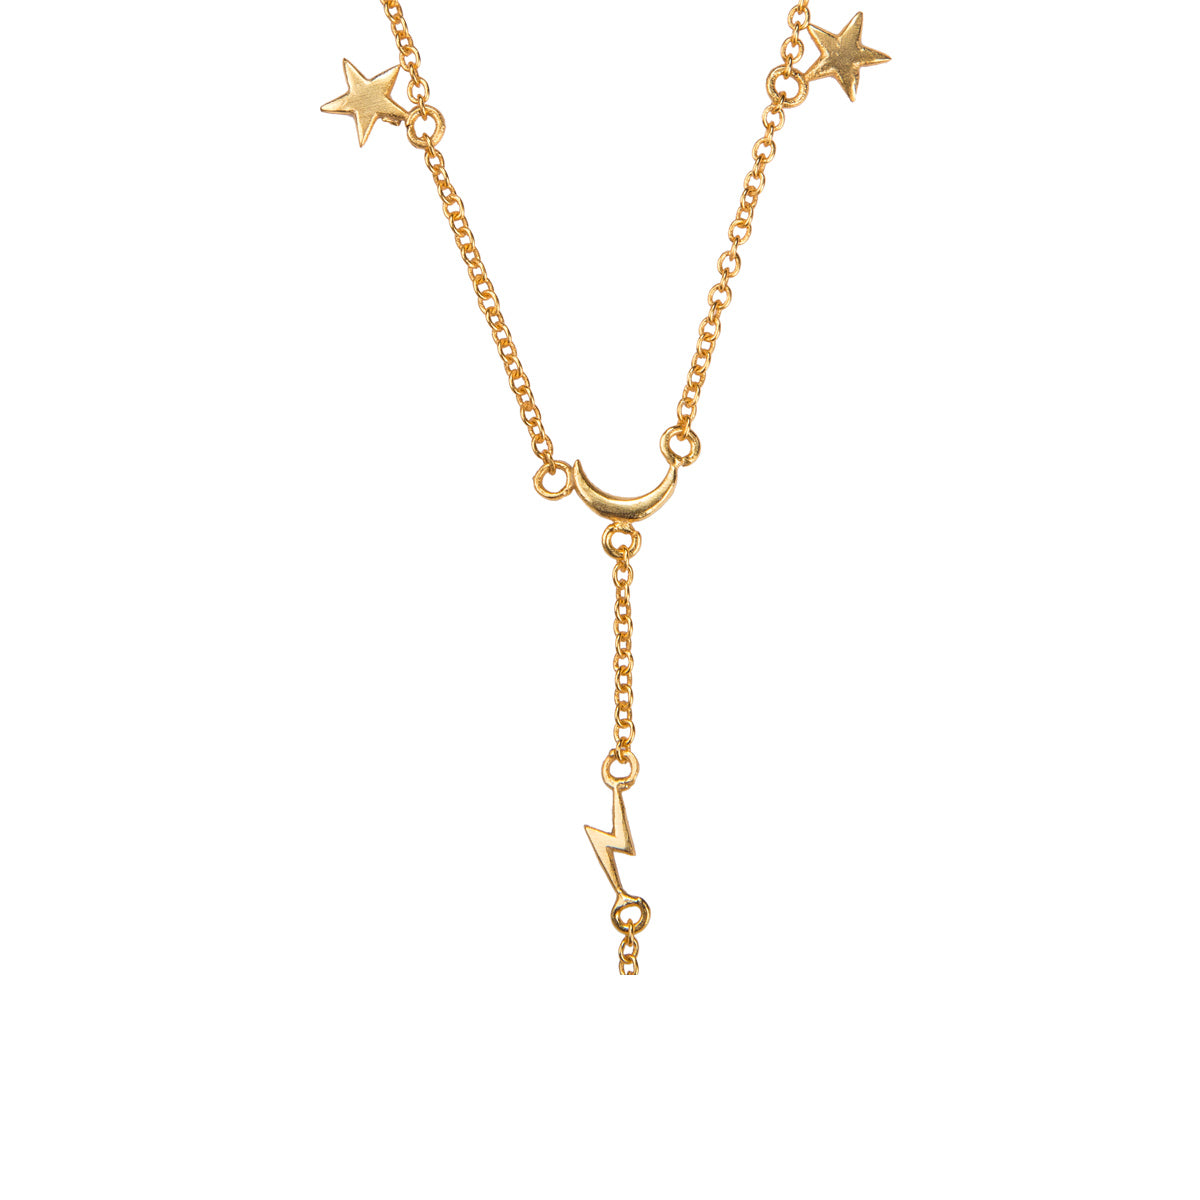 Star Crossed Lover Lariat Necklace